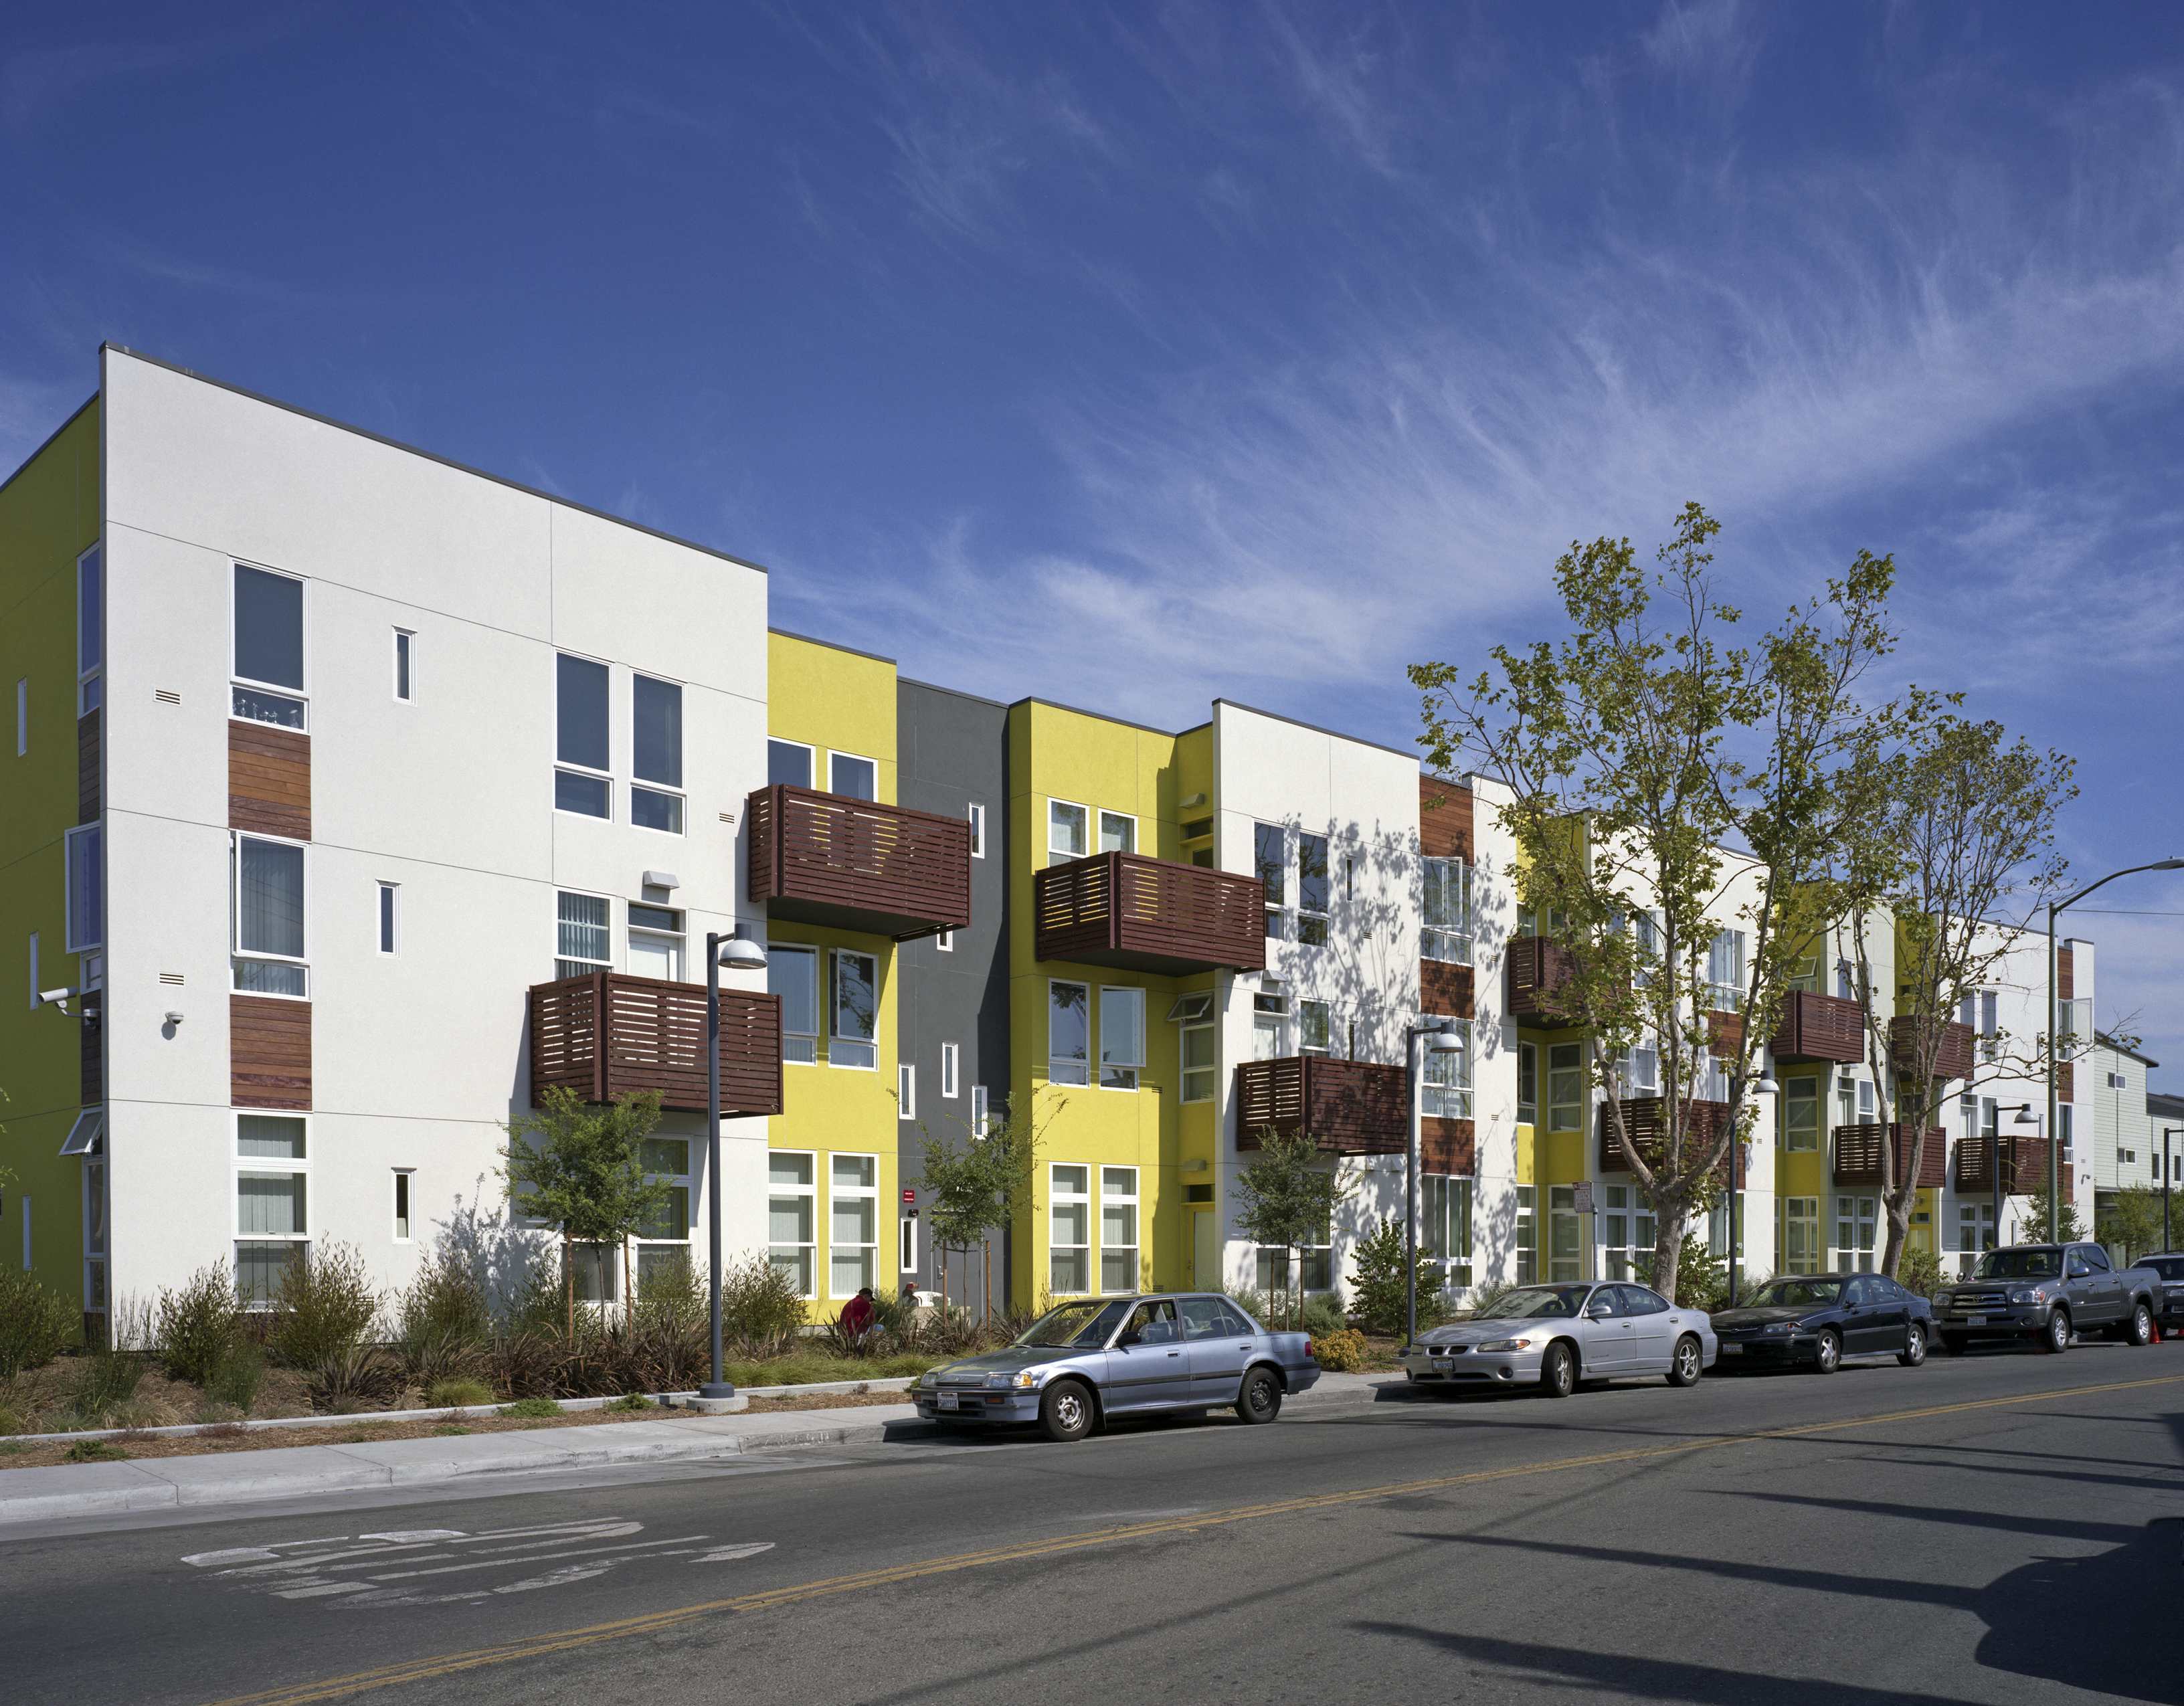 Elevation with wood-slat balconies and a planted sidewalk at Tassafaronga Village in East Oakland, CA. 